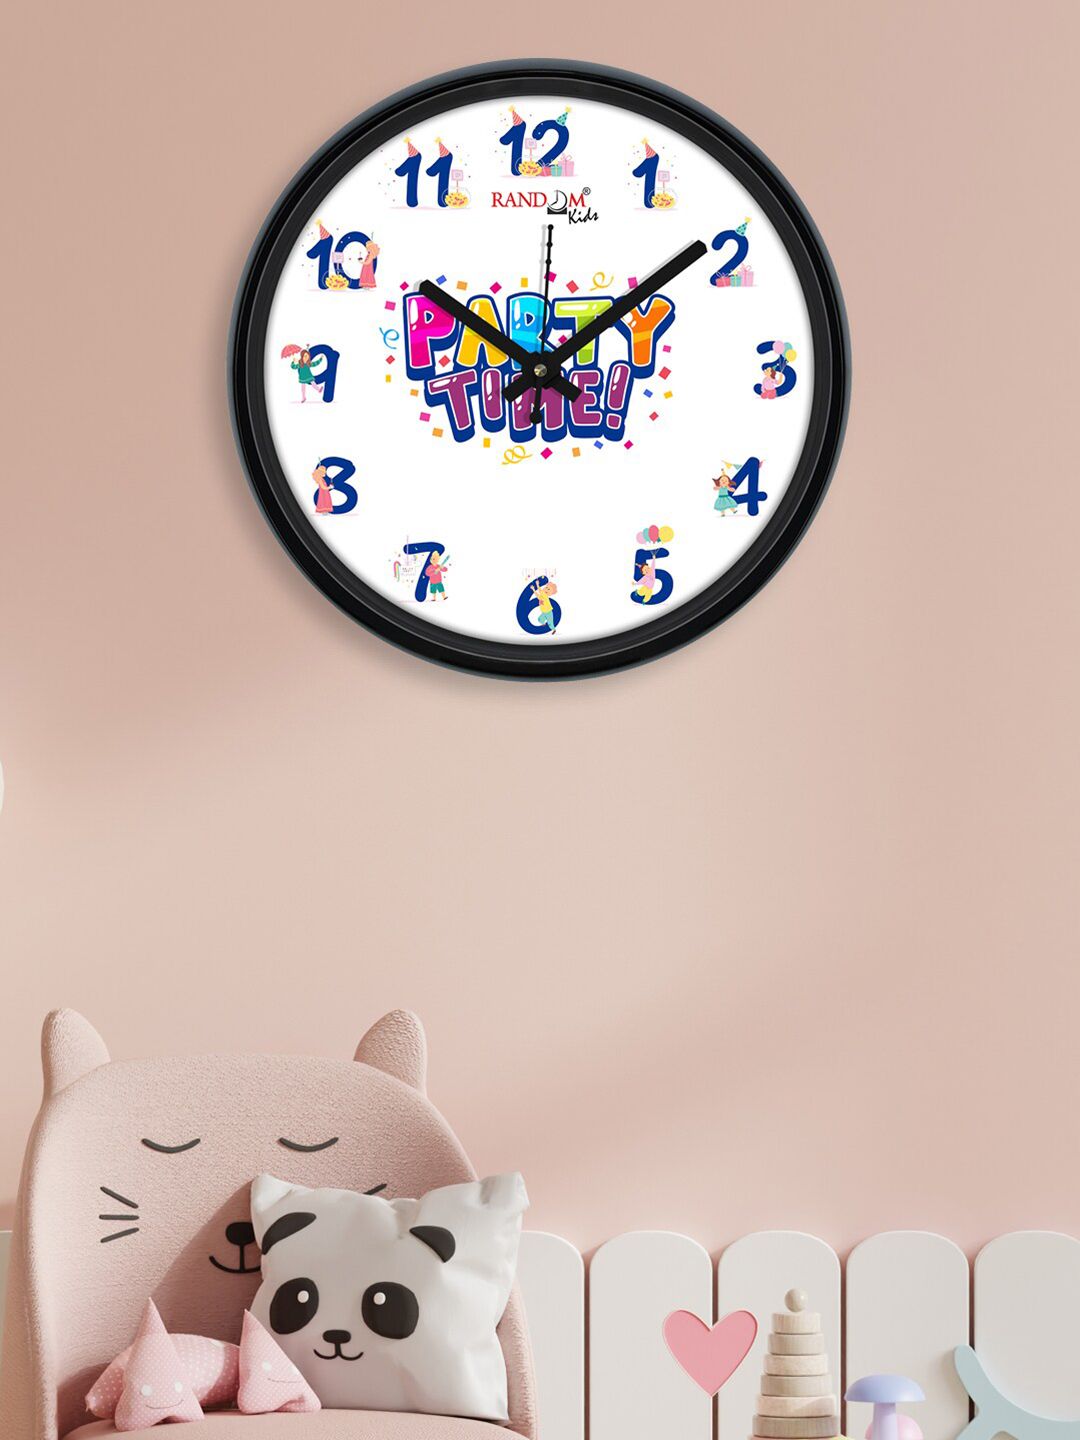 RANDOM White & Blue Printed Analogue Contemporary Wall Clock Price in India